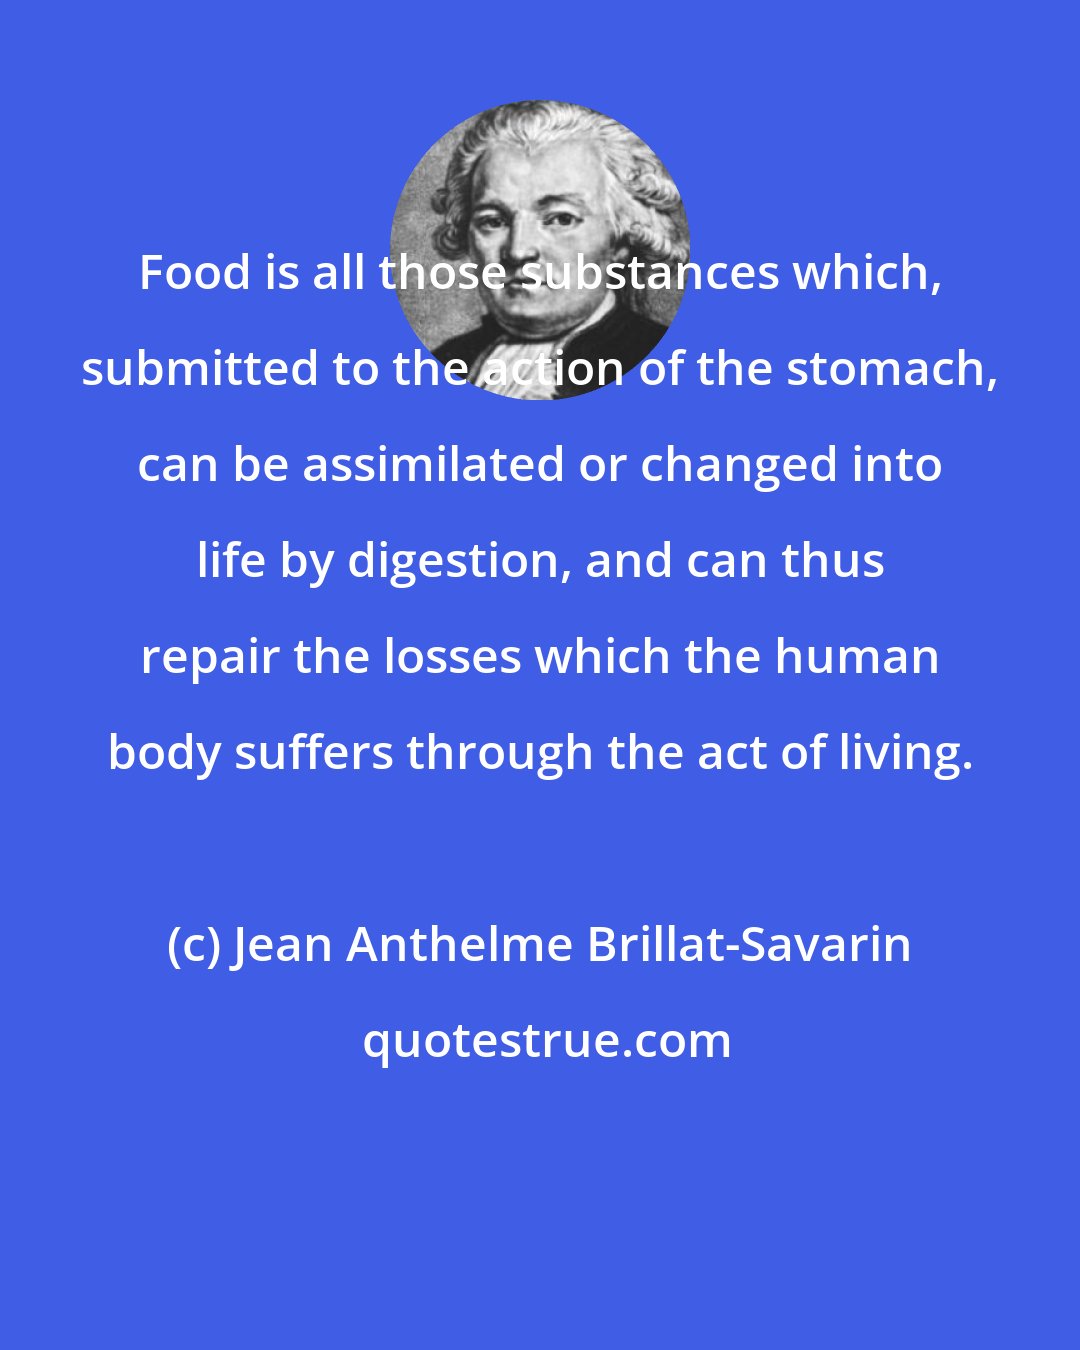 Jean Anthelme Brillat-Savarin: Food is all those substances which, submitted to the action of the stomach, can be assimilated or changed into life by digestion, and can thus repair the losses which the human body suffers through the act of living.